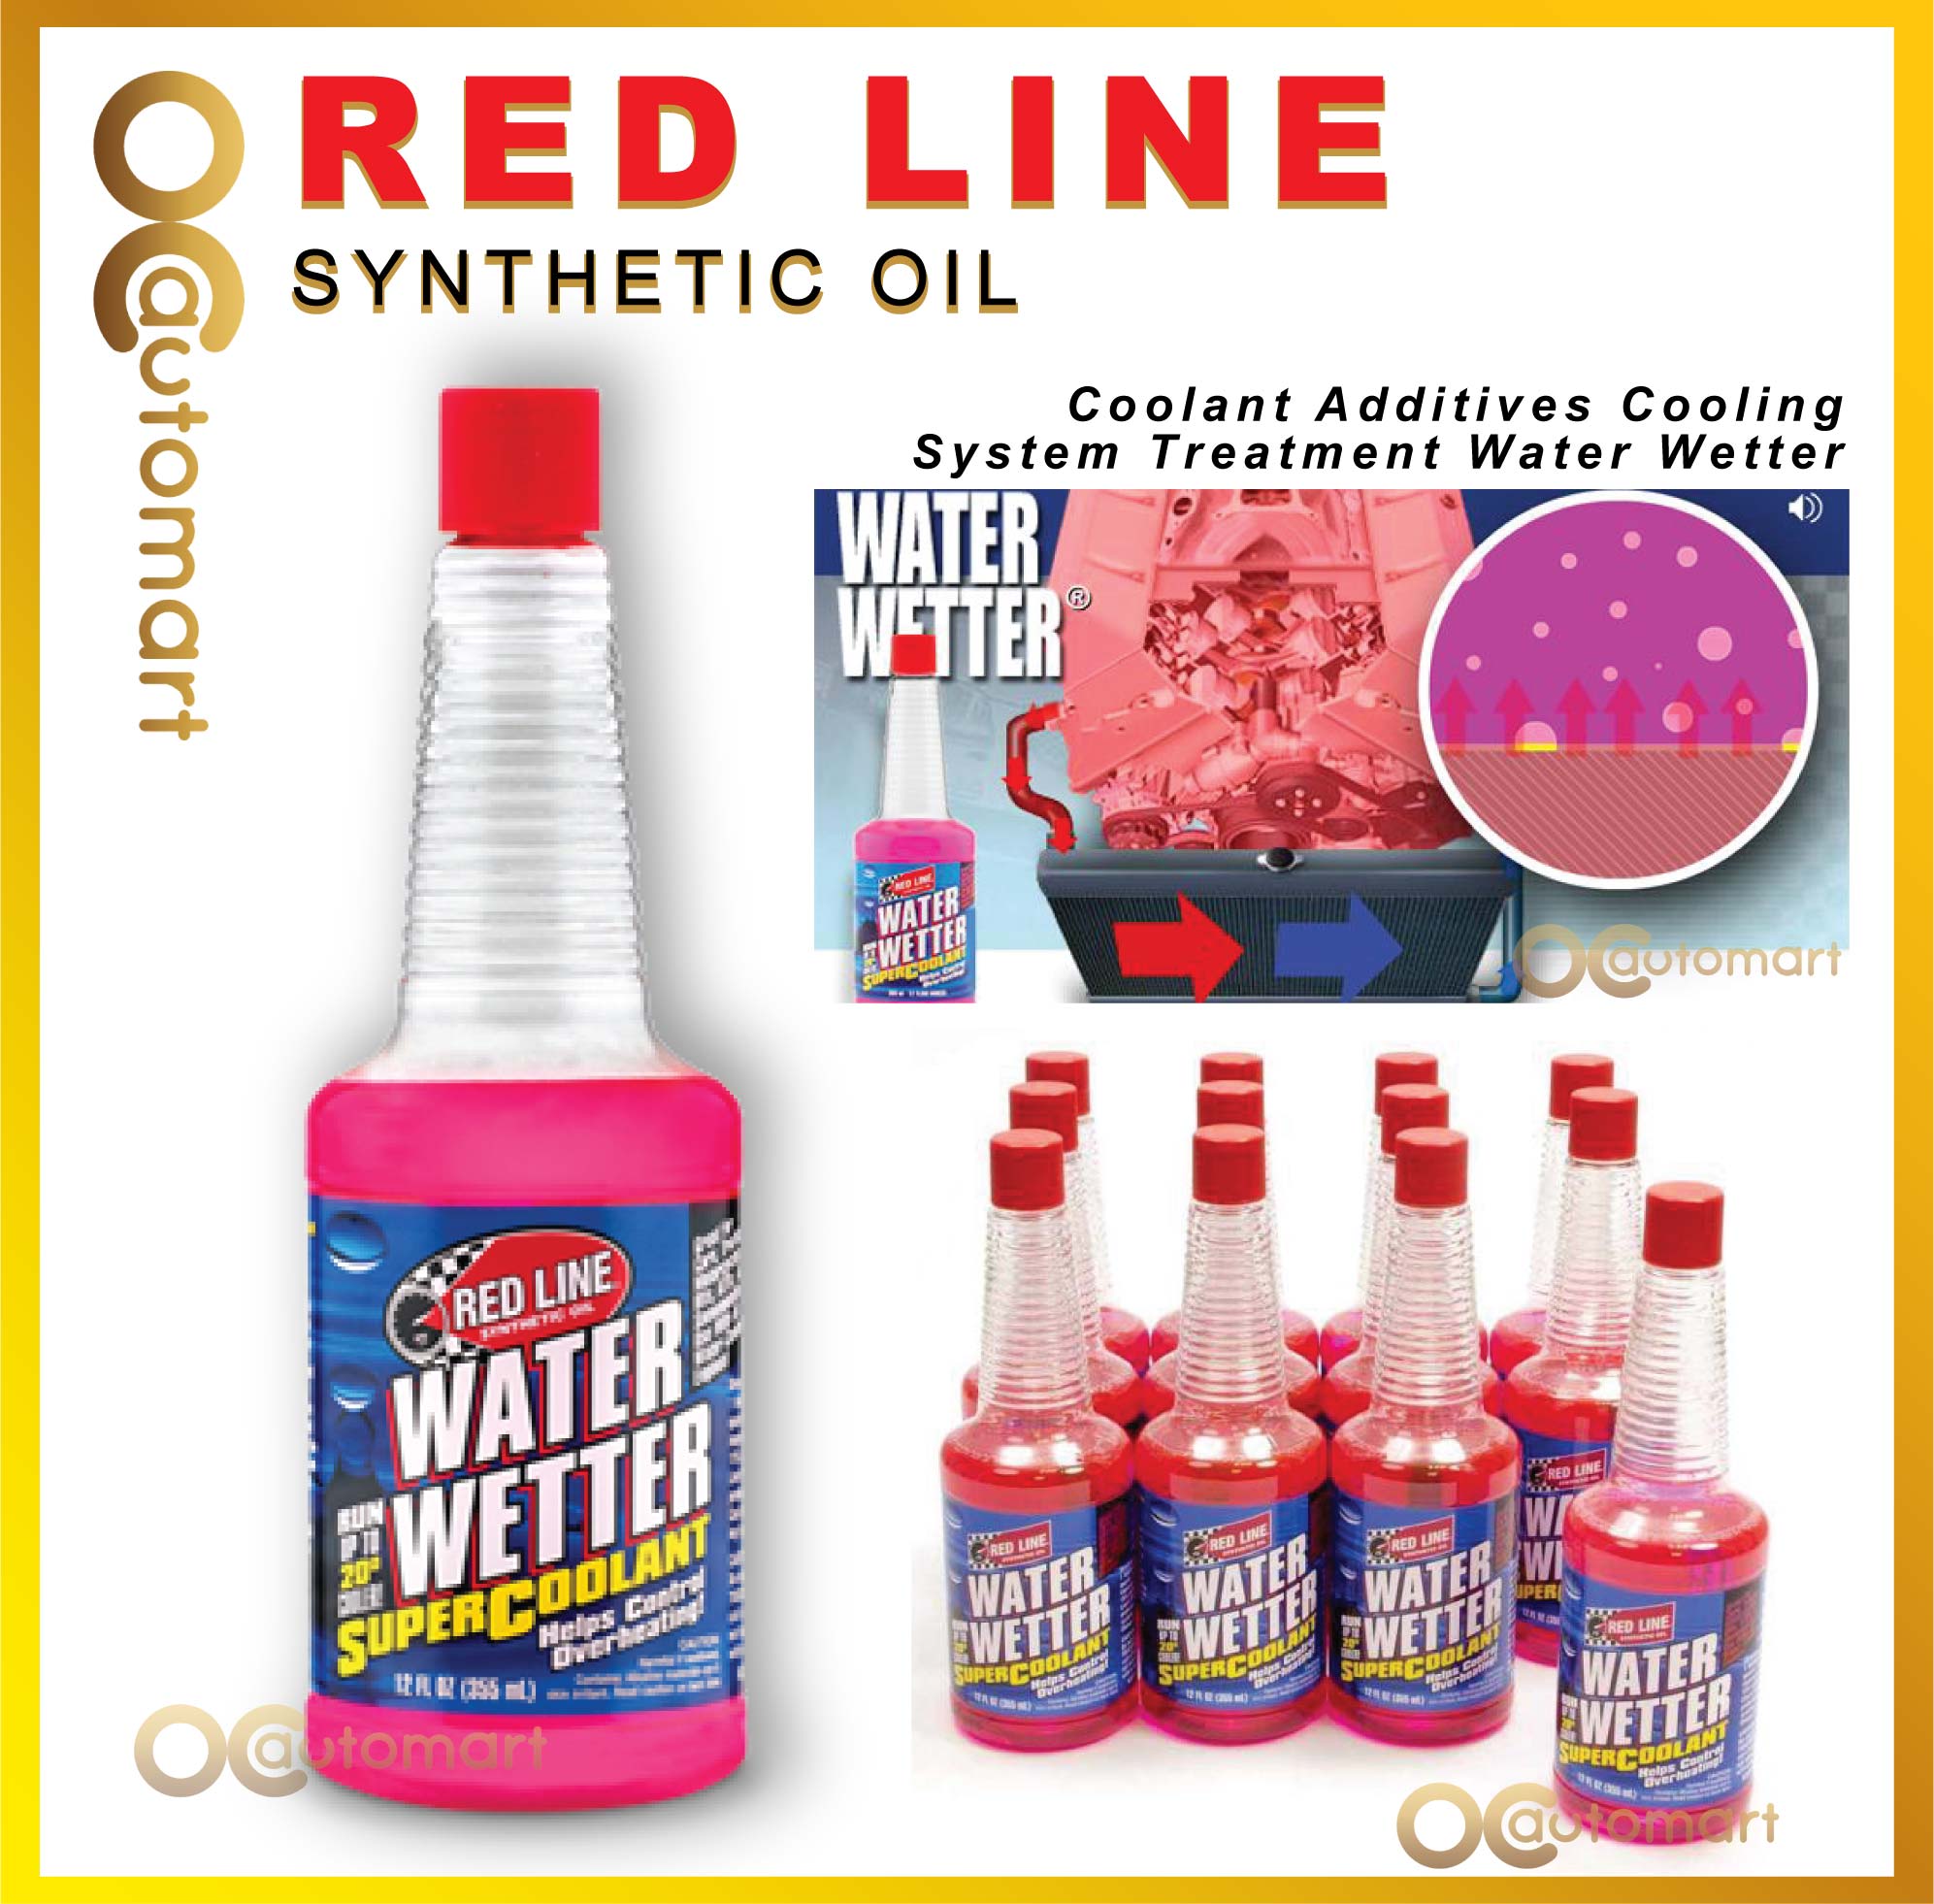 RED LINE Coolant Additives Cooling System Treatment 355ml Water Wetter